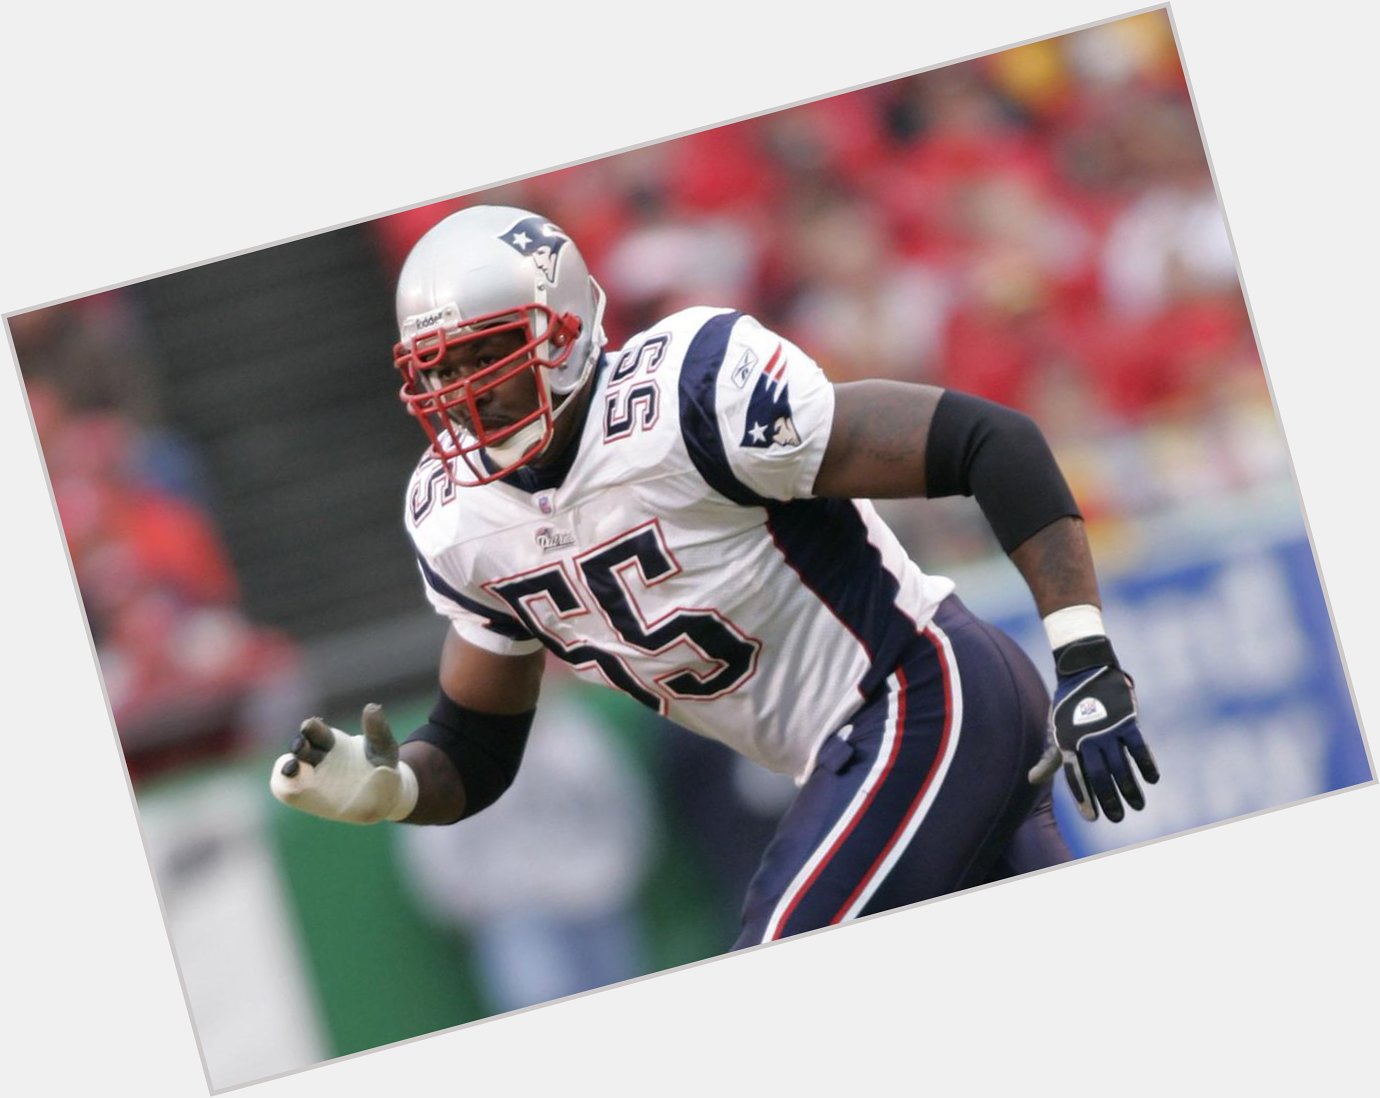 Happy Birthday to Willie McGinest, who turns 43 today! 